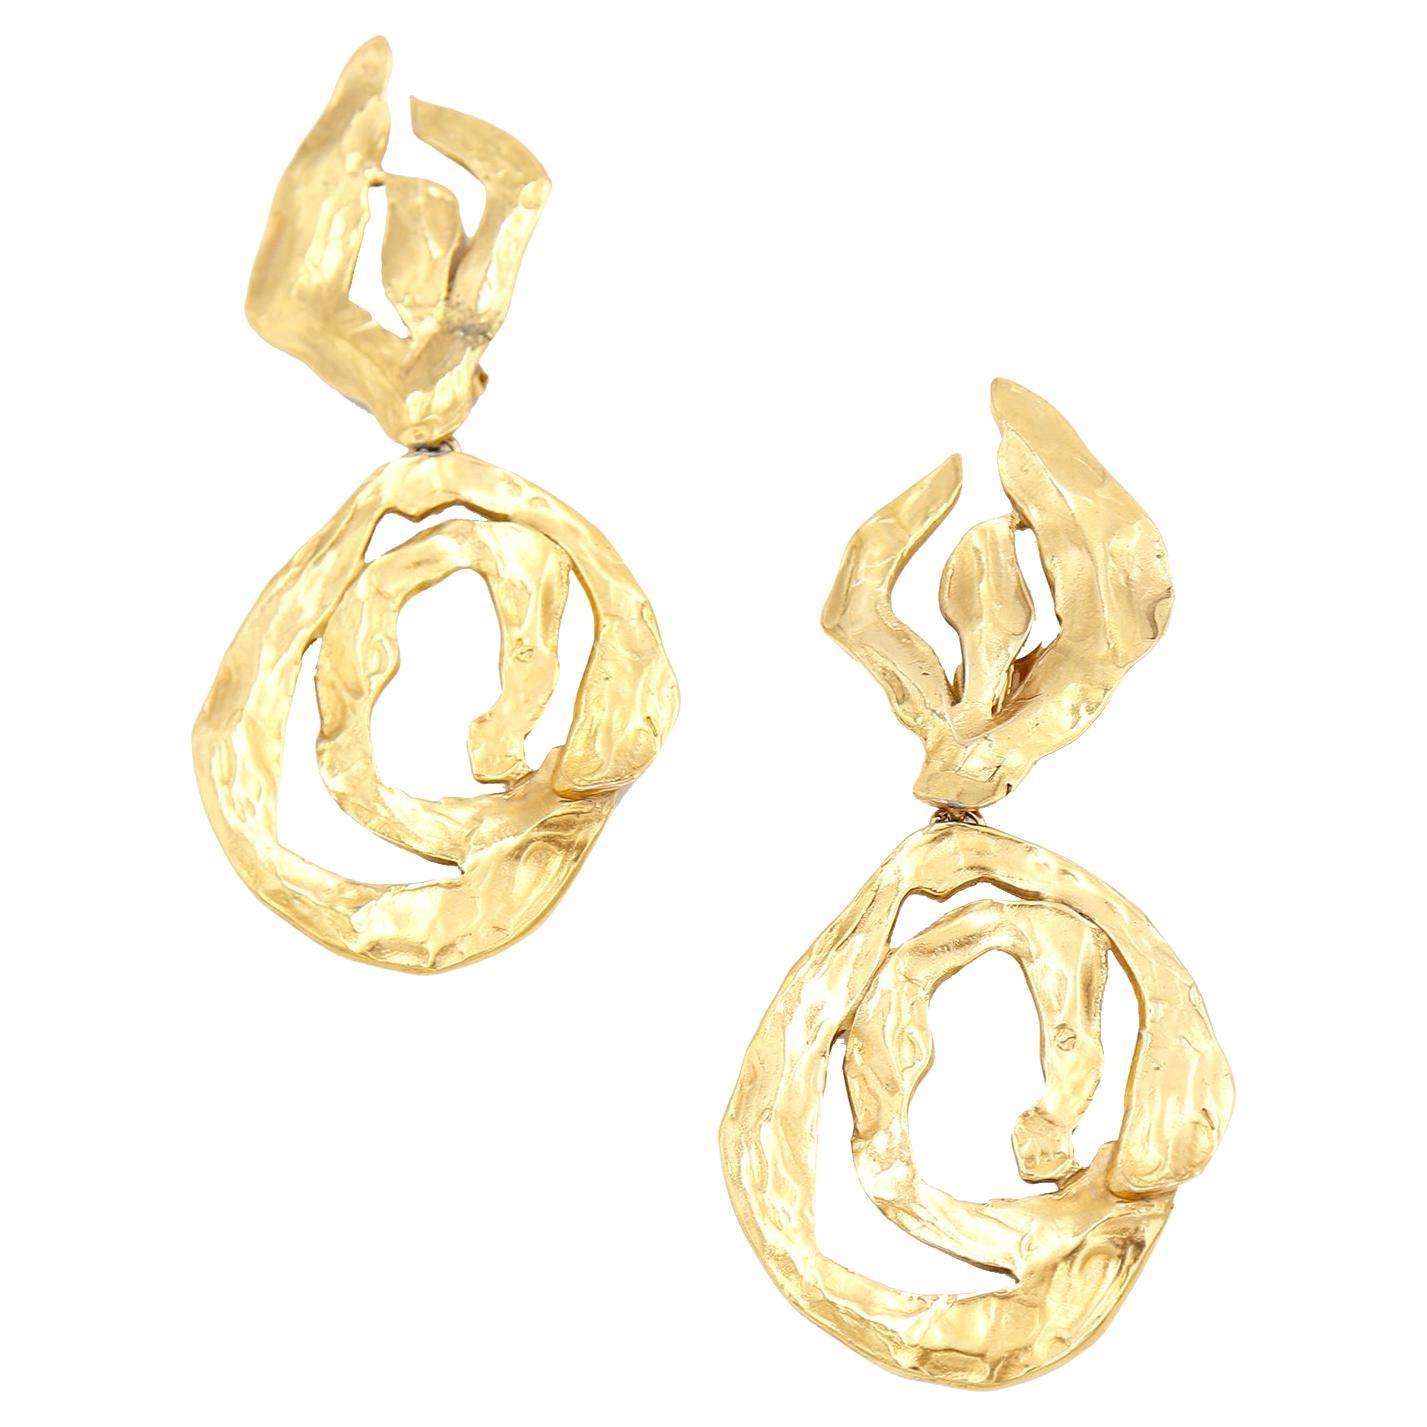 Huge YSL Vintage Gold Statement Earrings Yves Saint Laurent Abstract Clip Ons